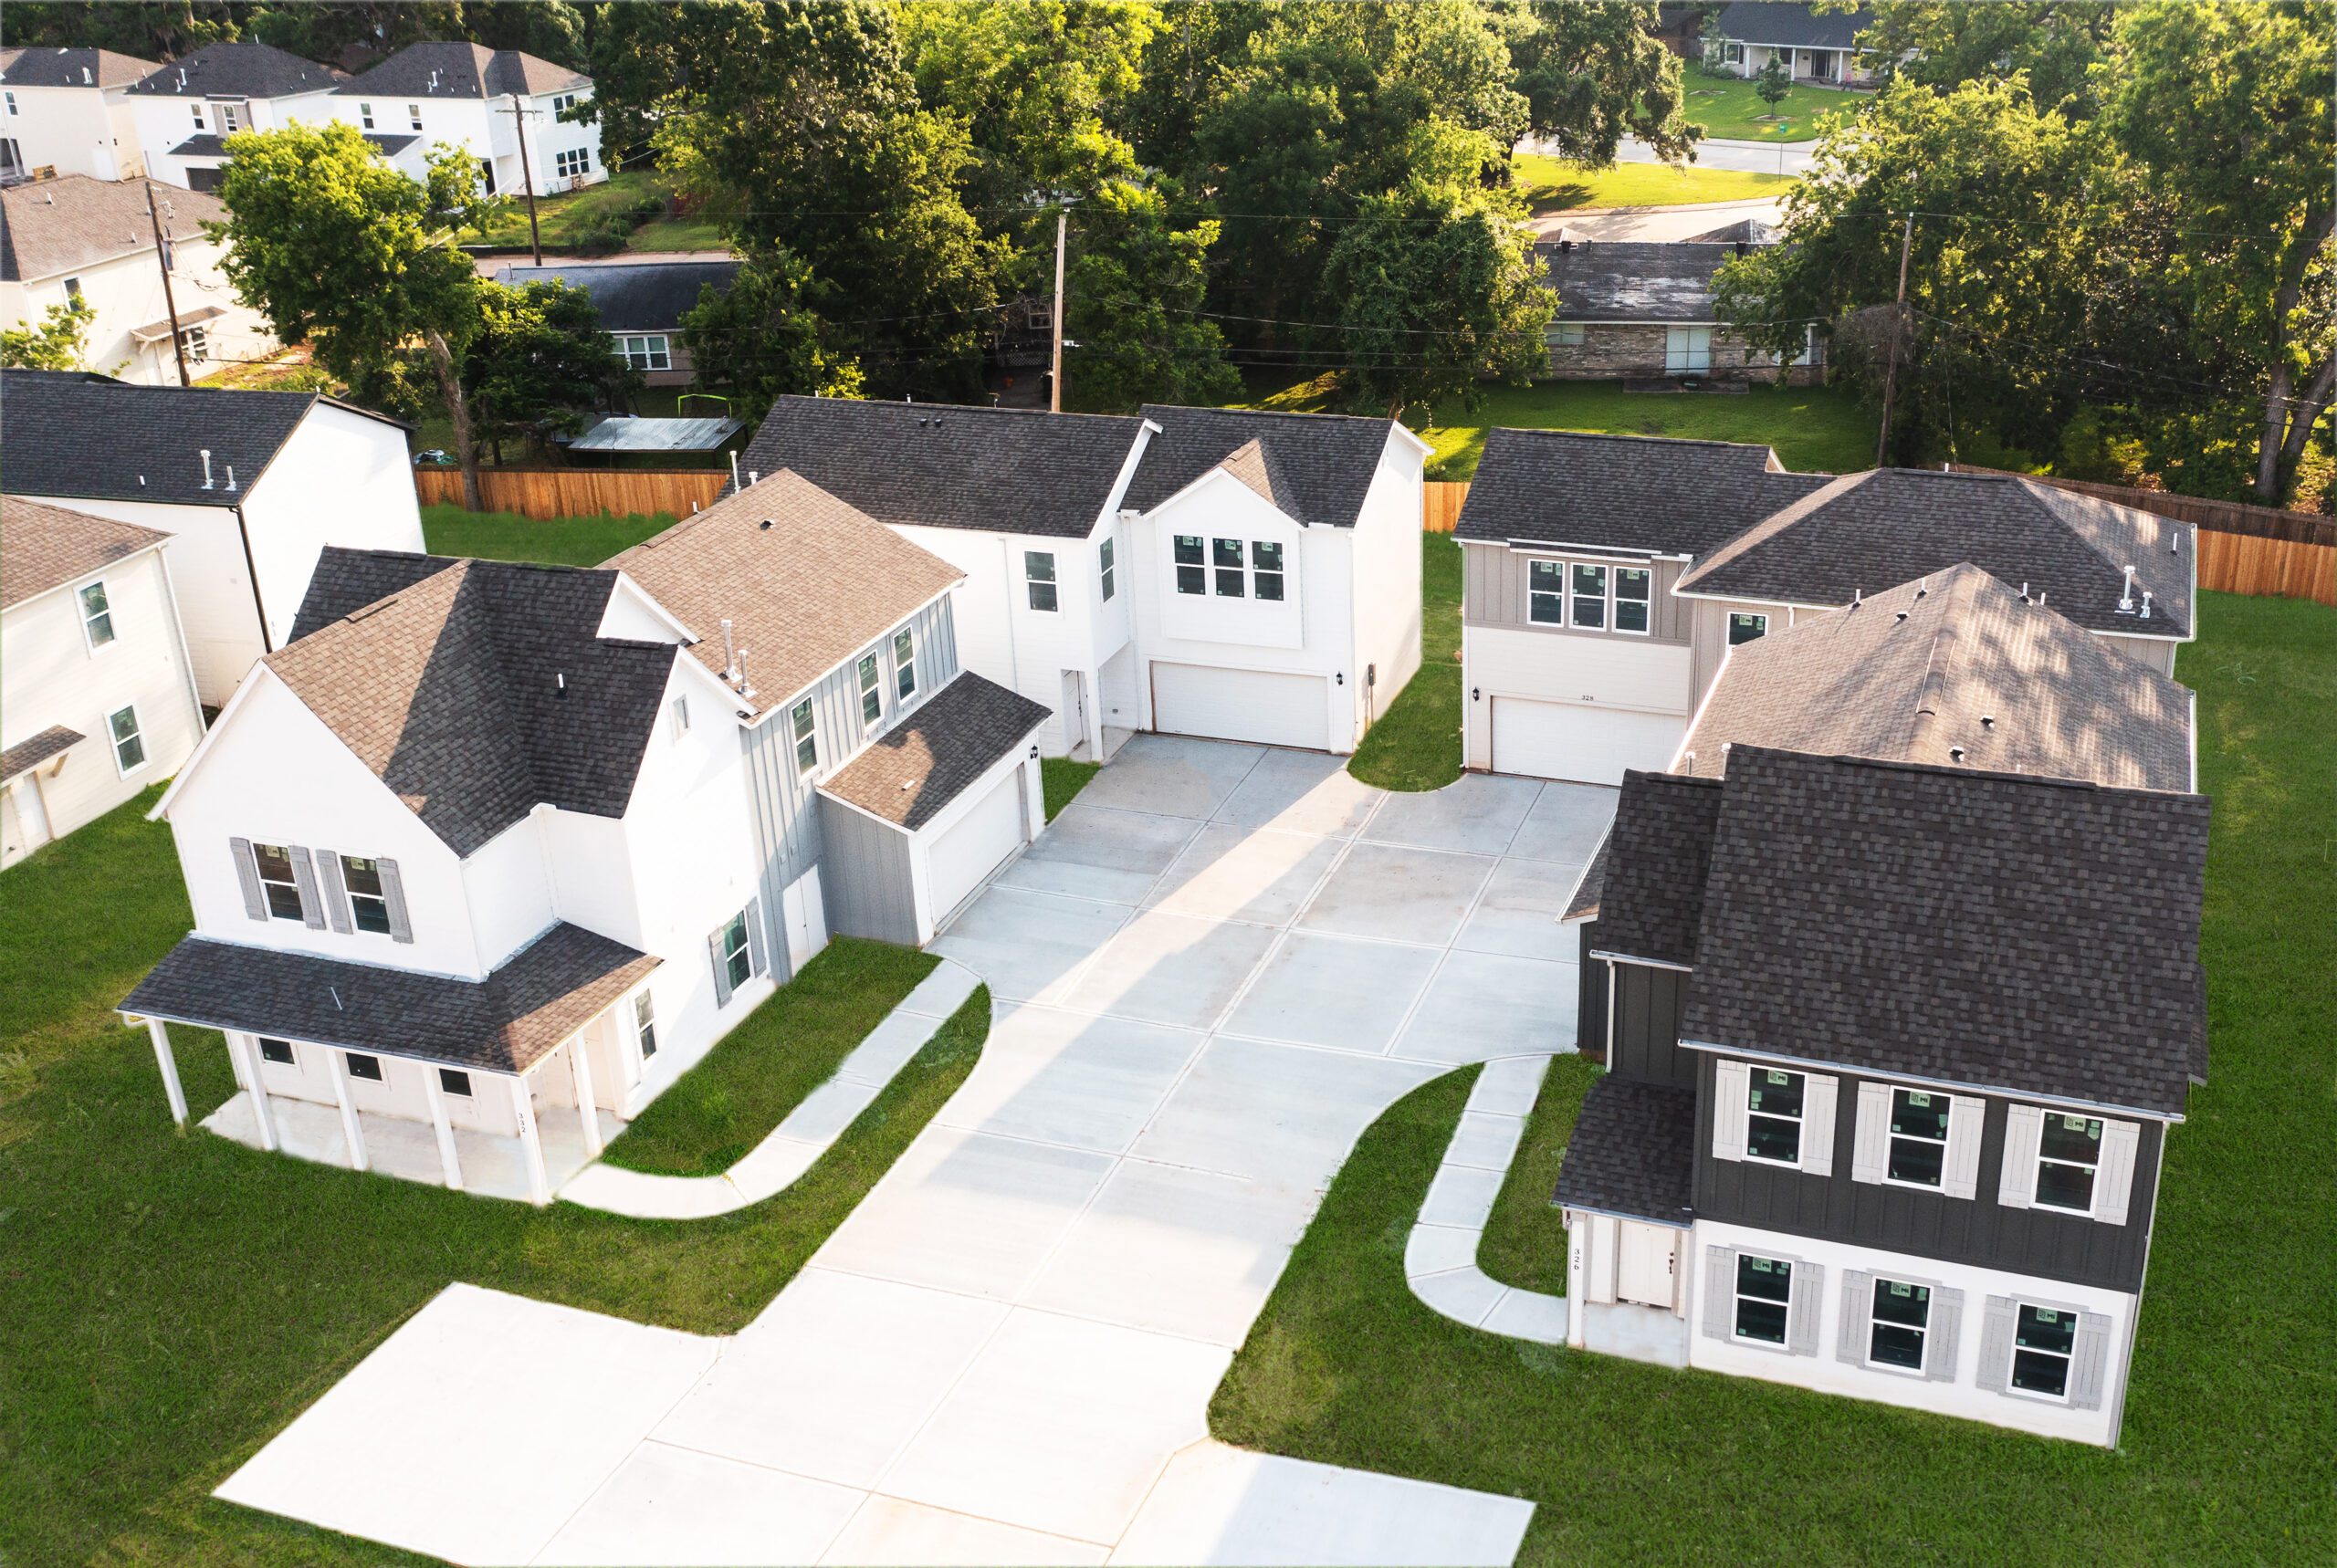 Exterior of multiple black roof and white homes.